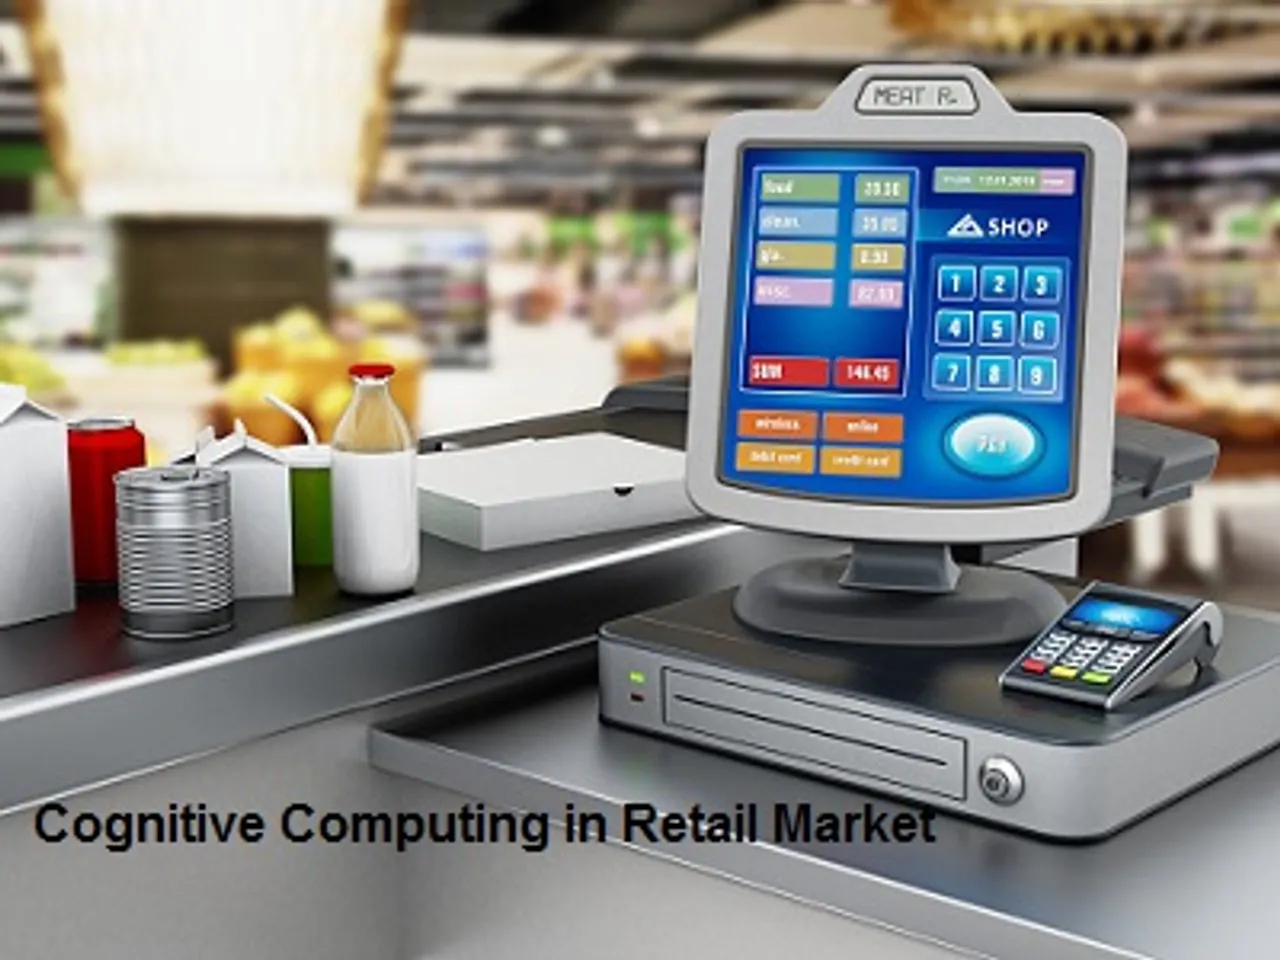 Cognitive Computing in Retail Market